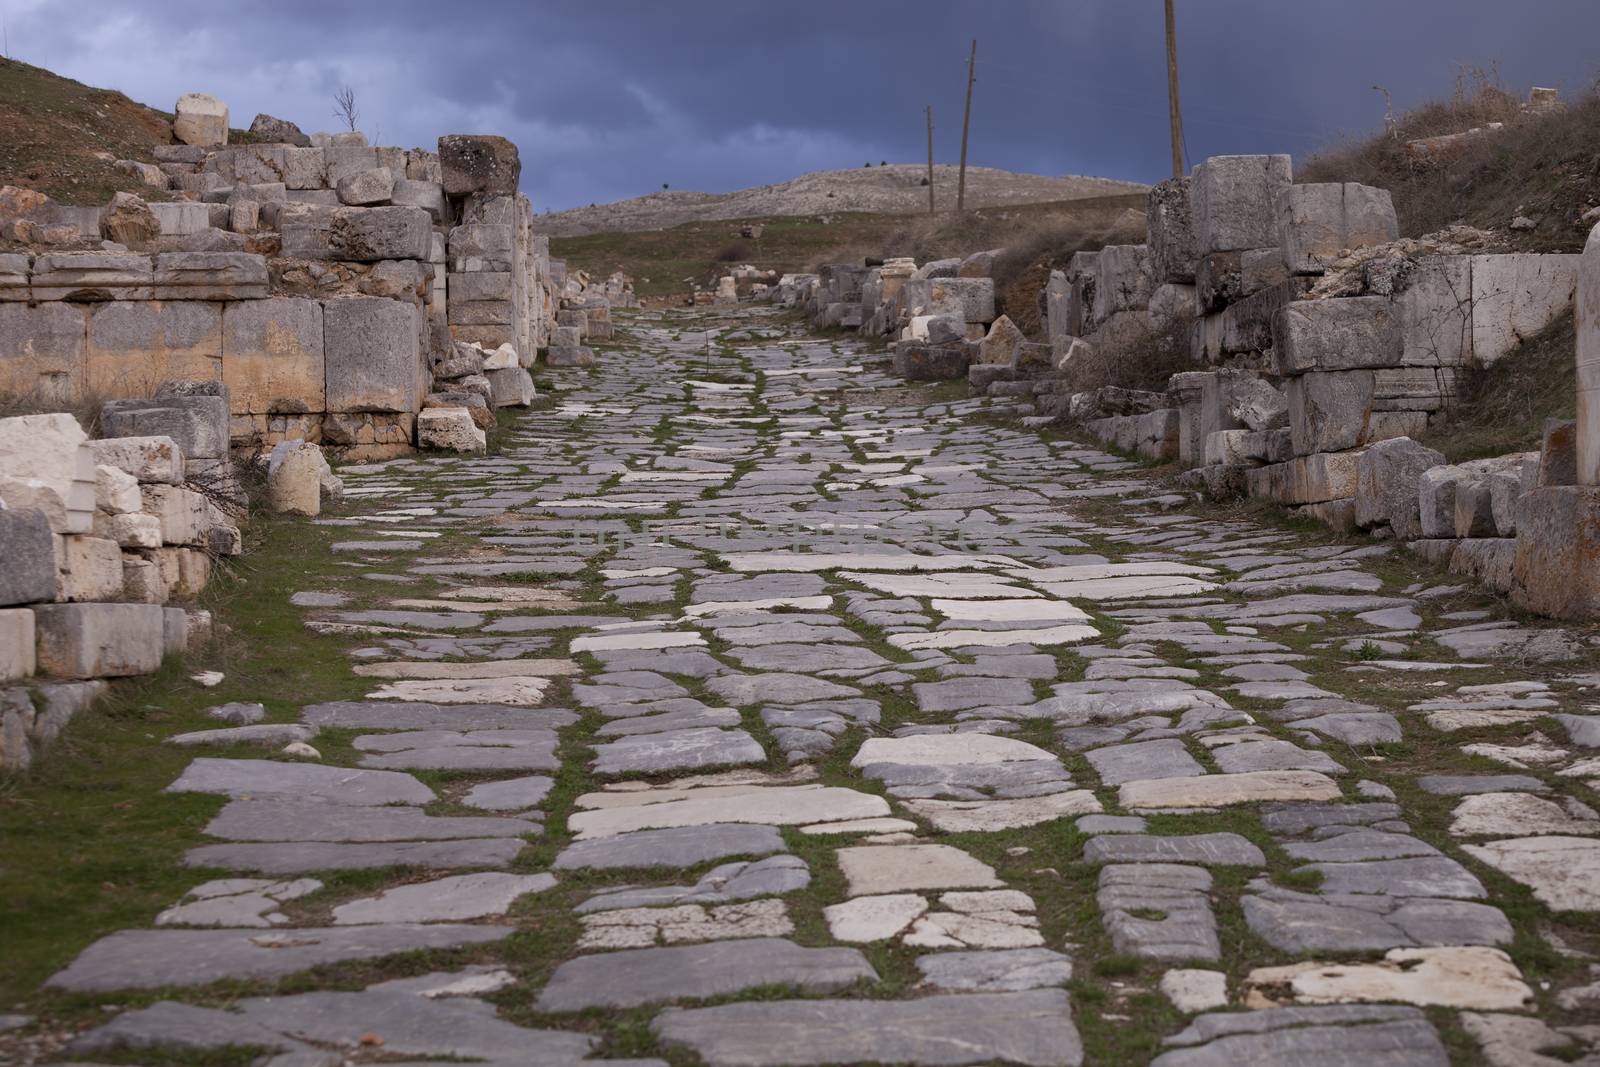 Main roadway through the ancient town of  Antioch Pisidian